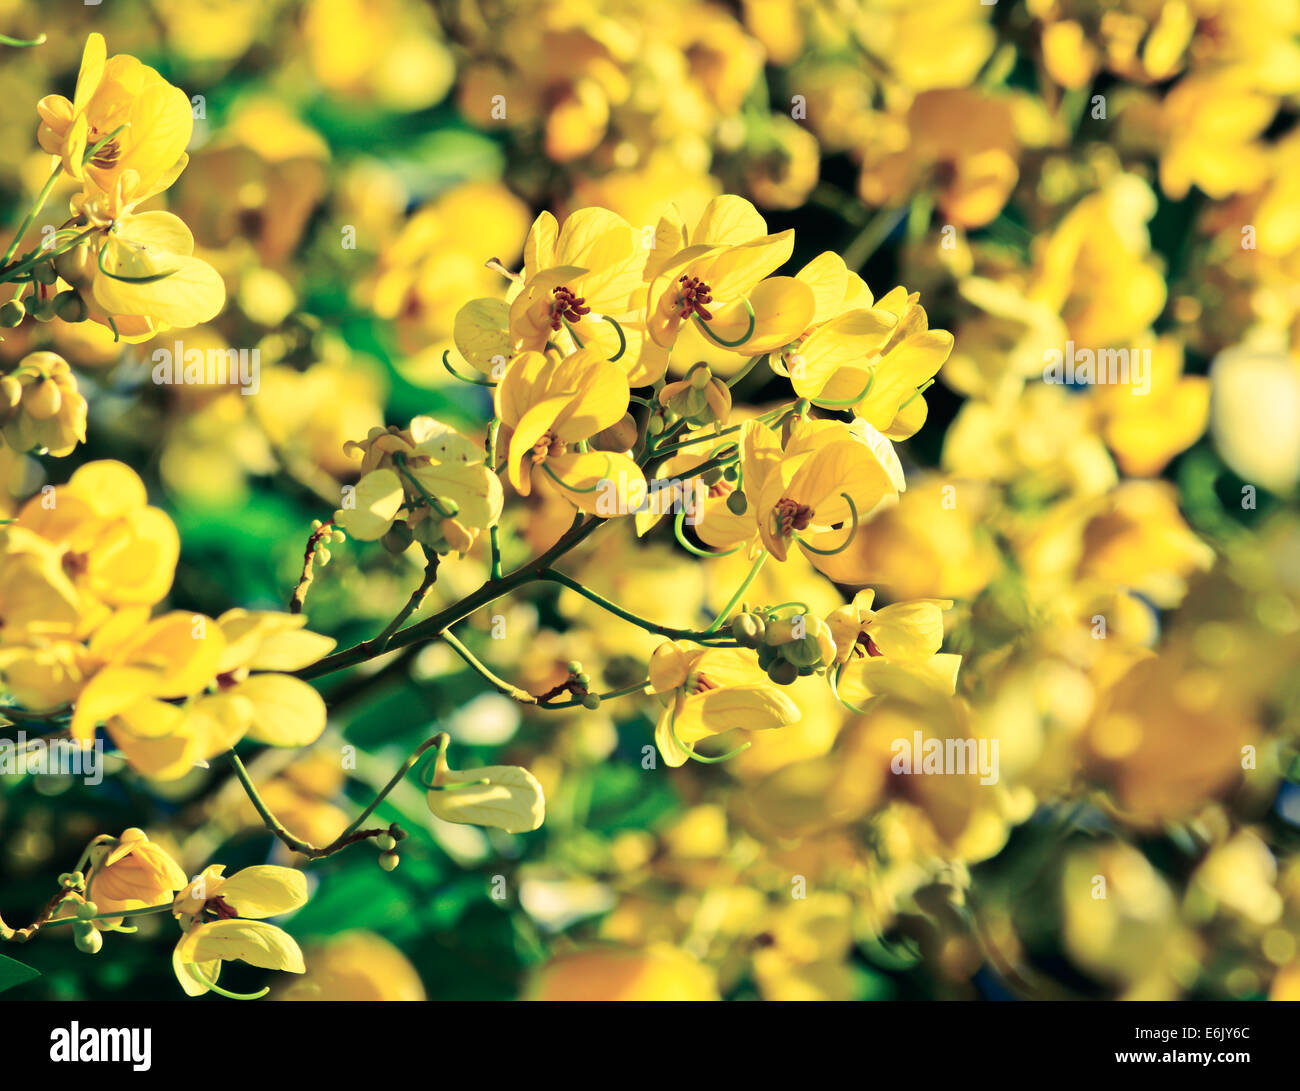 closeup of  yellow  flowers  on tree (Senna siamea Lam)  with vintage filter ; blur foreground and background Stock Photo